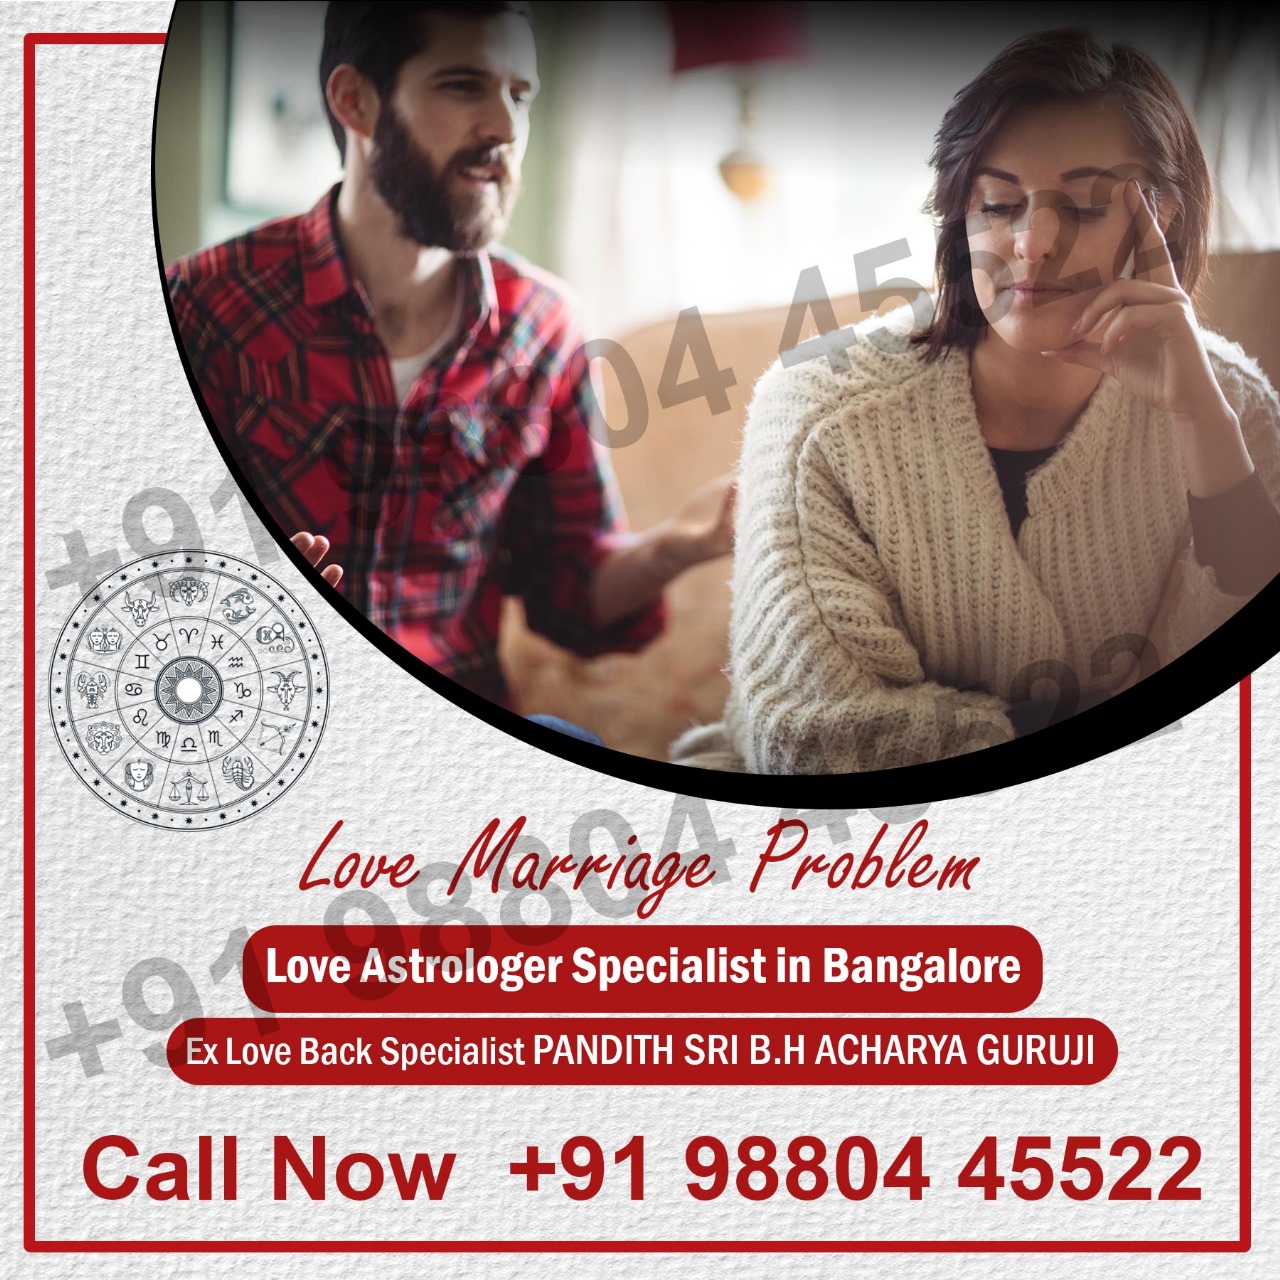 Love Astrologer Specialist in Bangalore